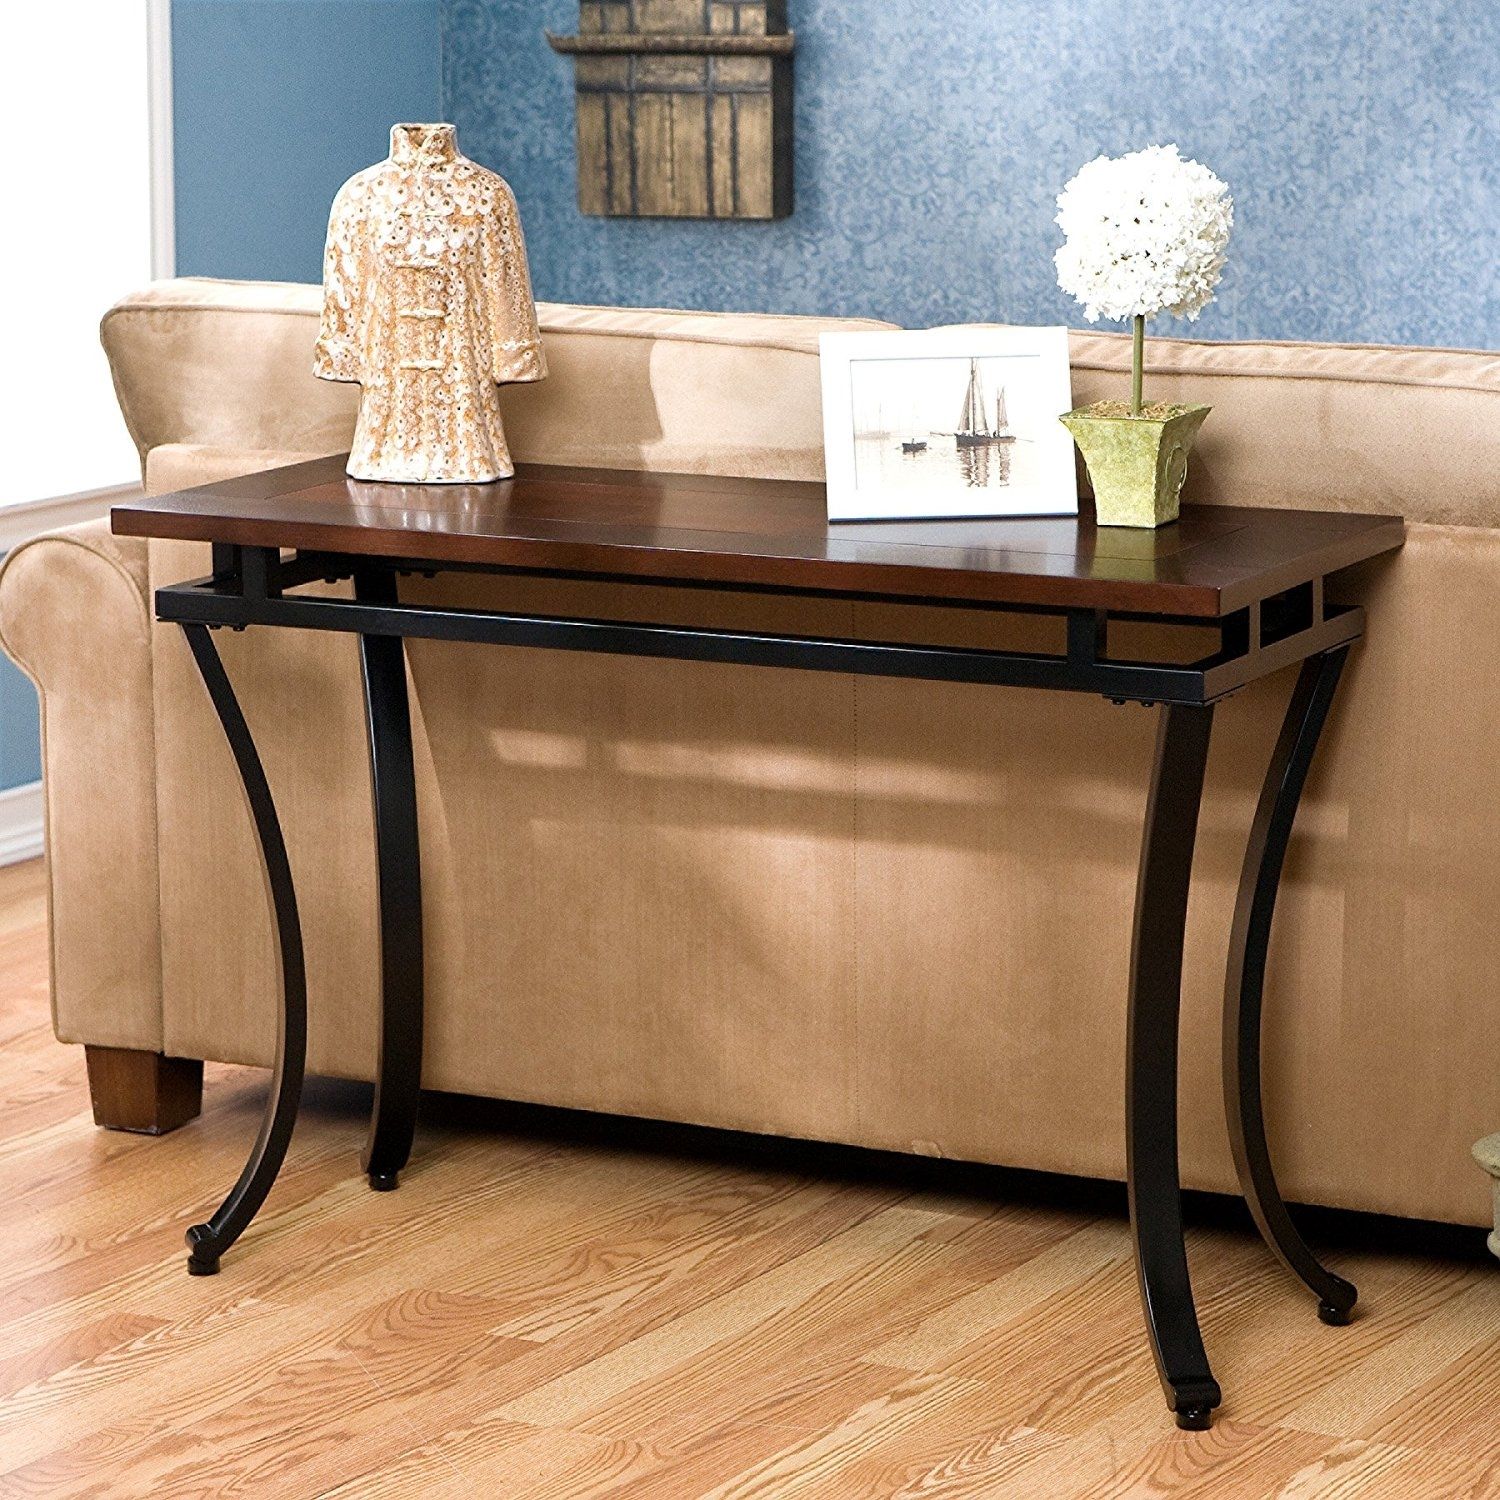 Sofa : Sofa Table Price Tall Narrow Console Table Narrow Wrought Within Sofas With Back Consoles (Photo 1 of 10)